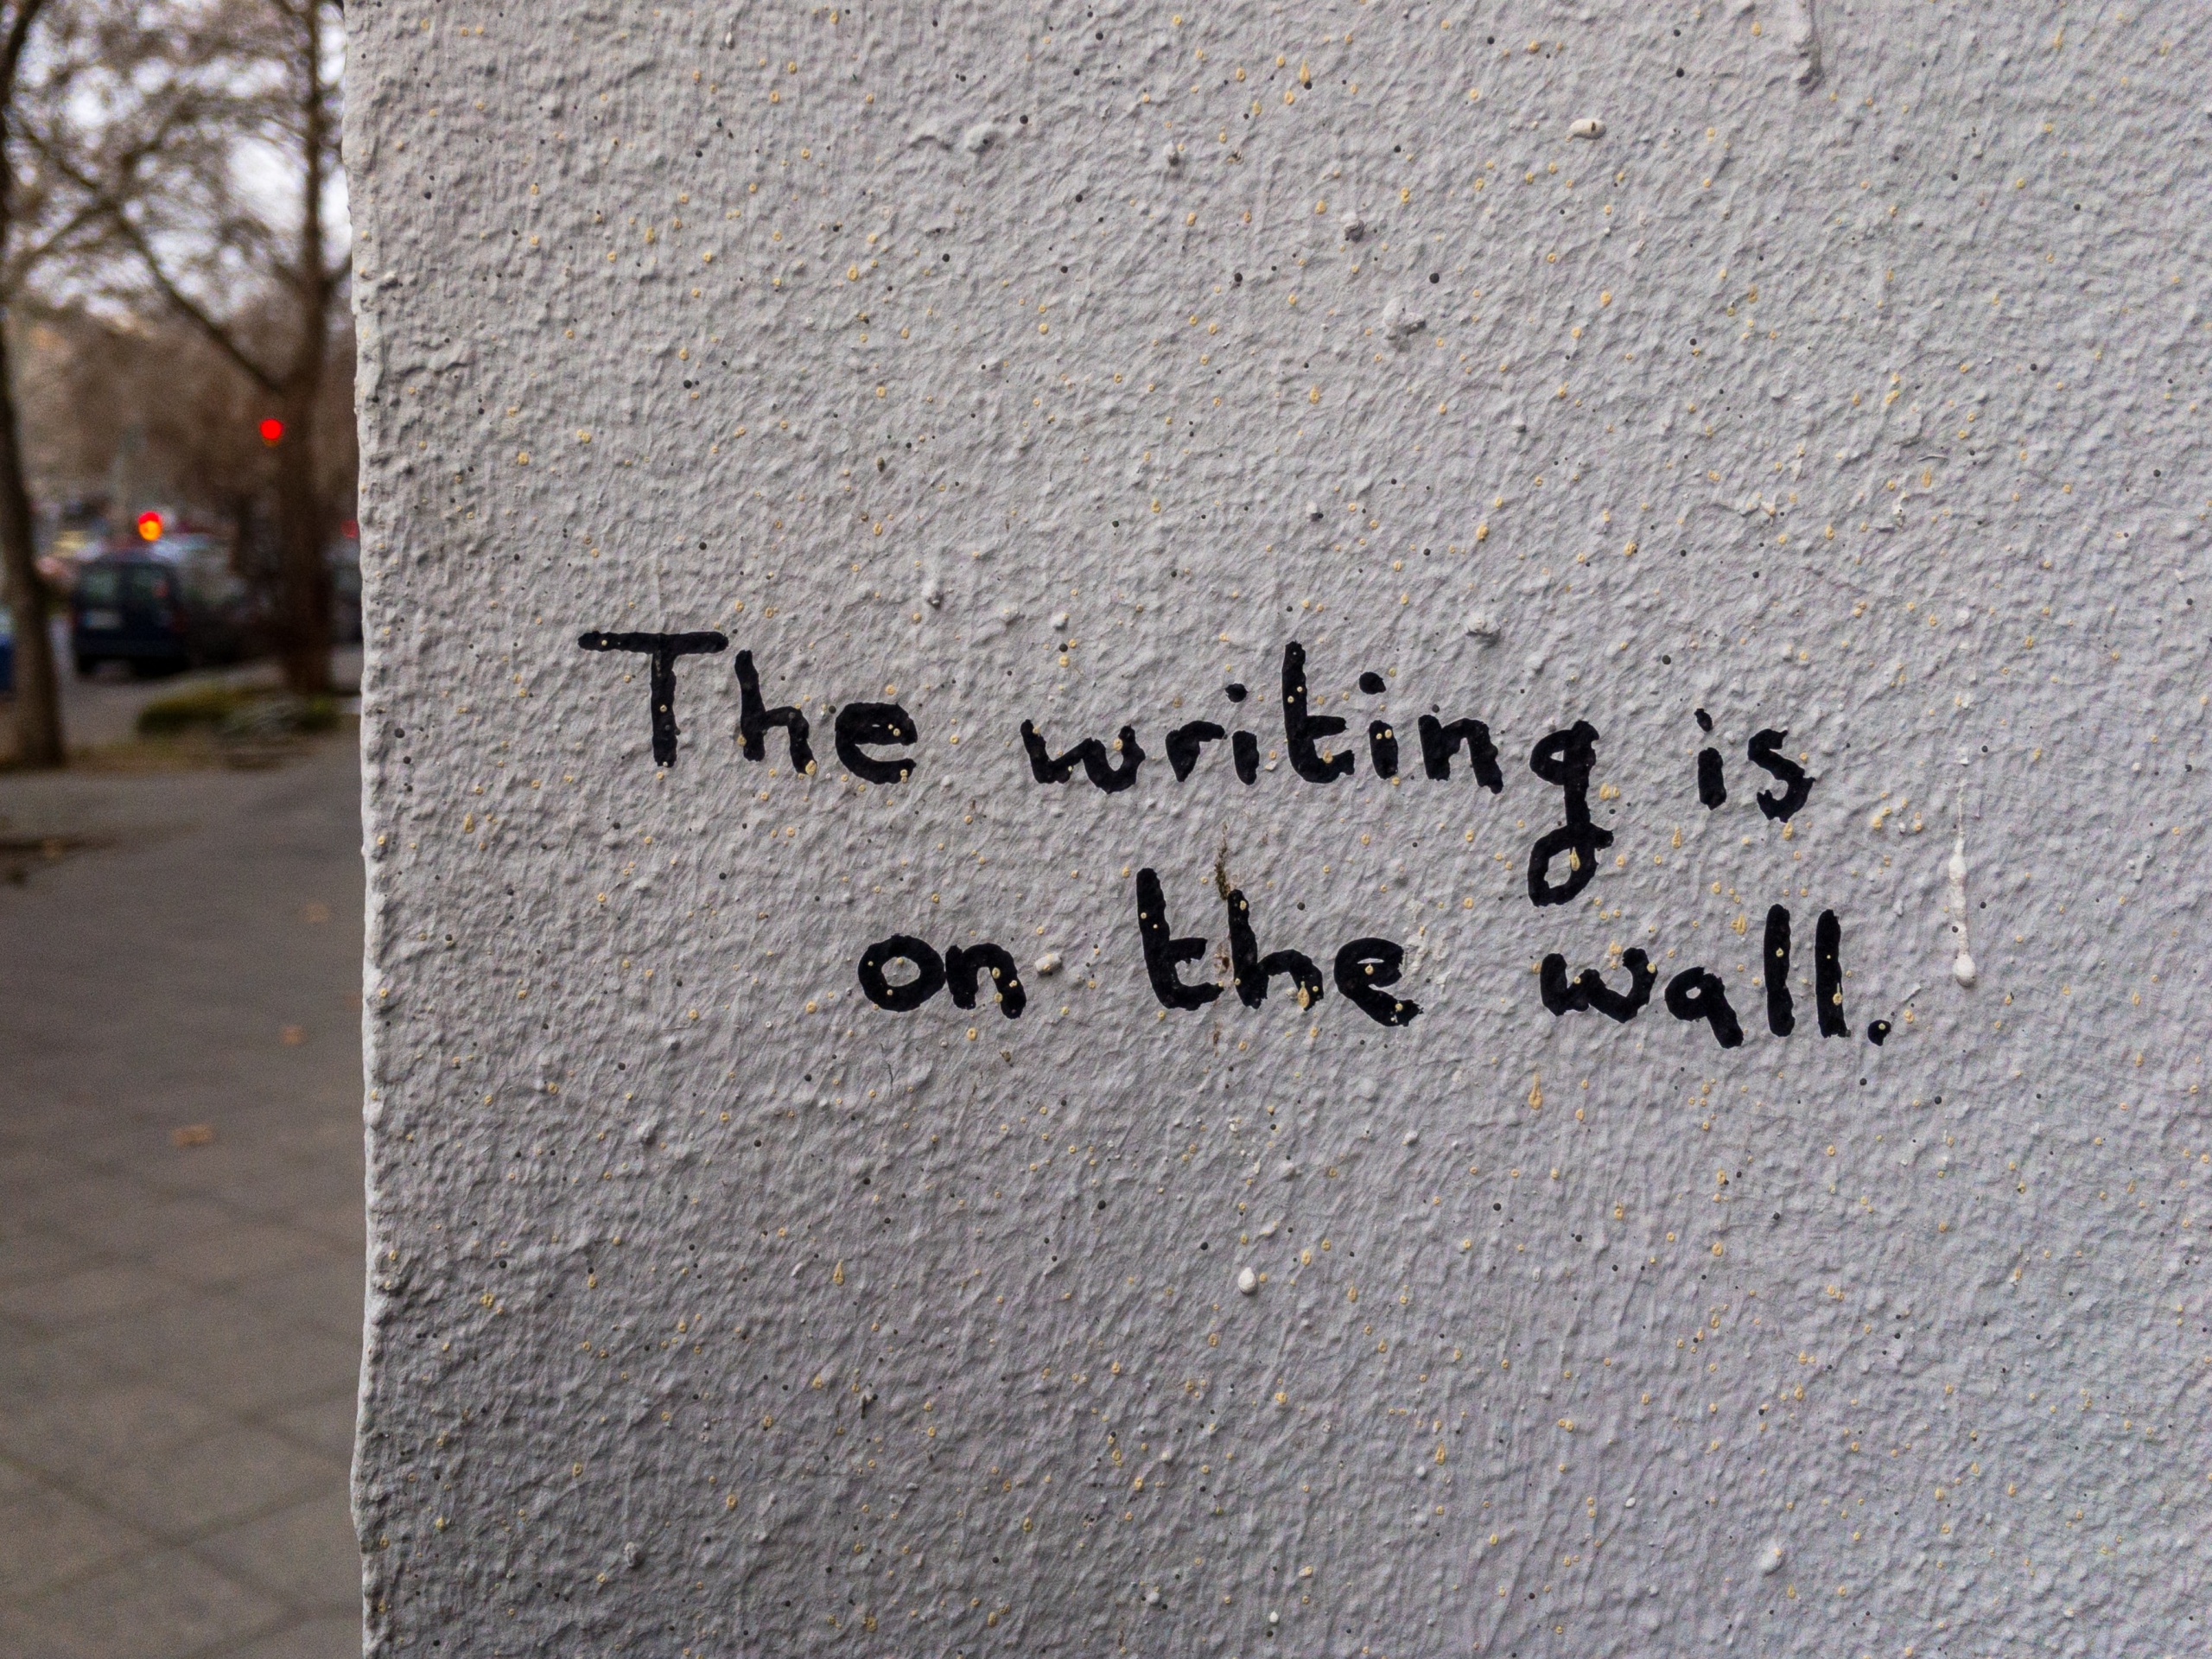 The writing is on the wall - time for action on prisoner healthcare is now. Photo by Randy Tarampi on Unsplash